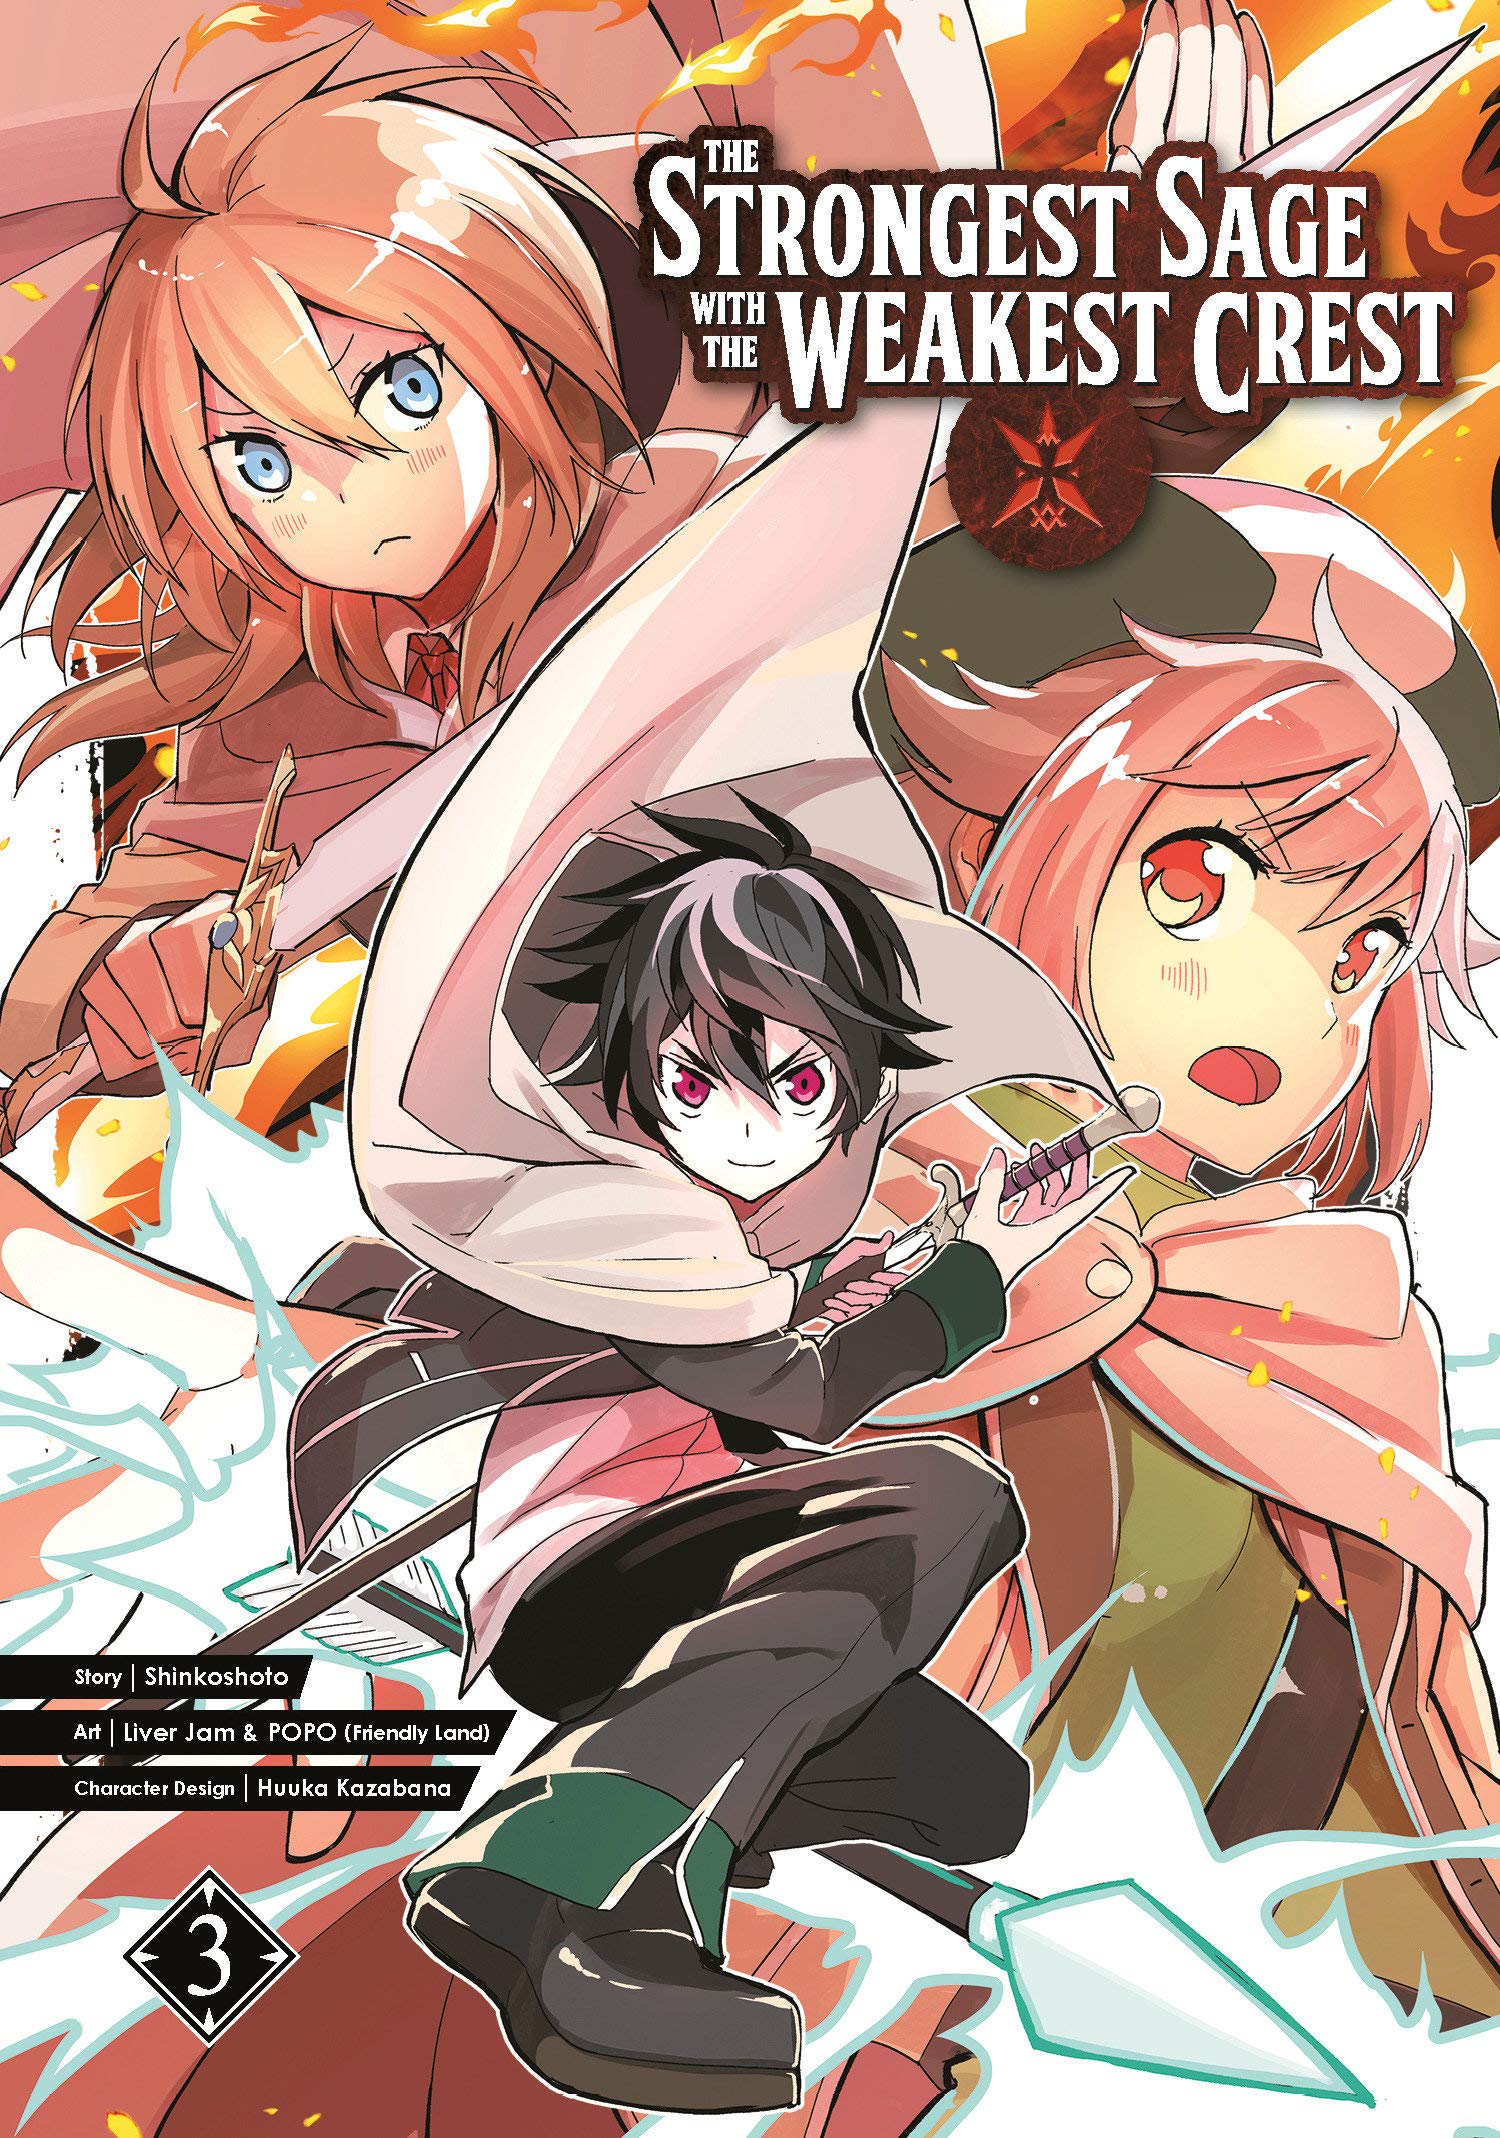 The Strongest Sage with the Weakest Crest Volume 3 Review • Anime UK News